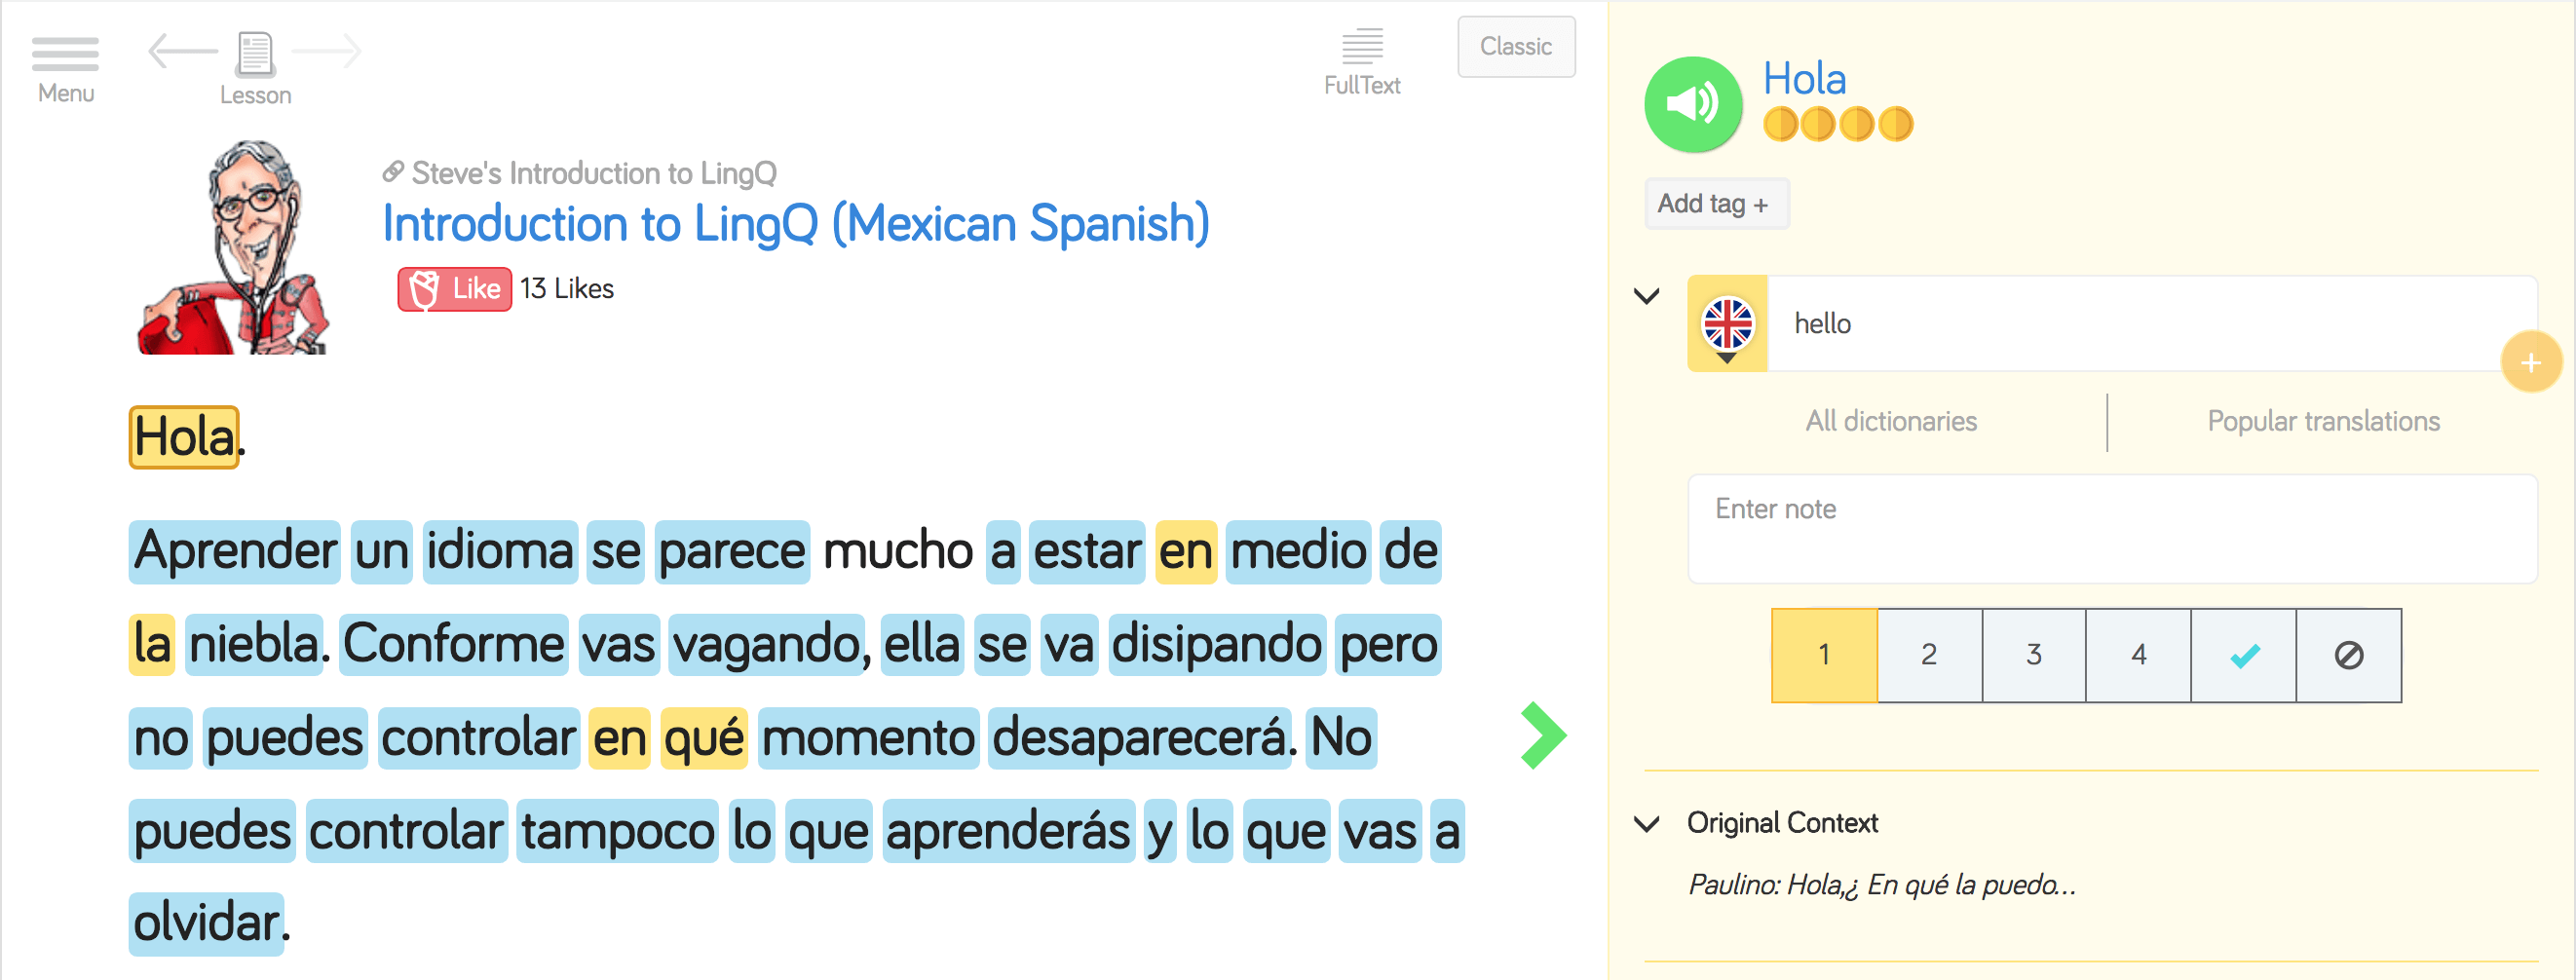 Spanish Accents From Around the World on LingQ